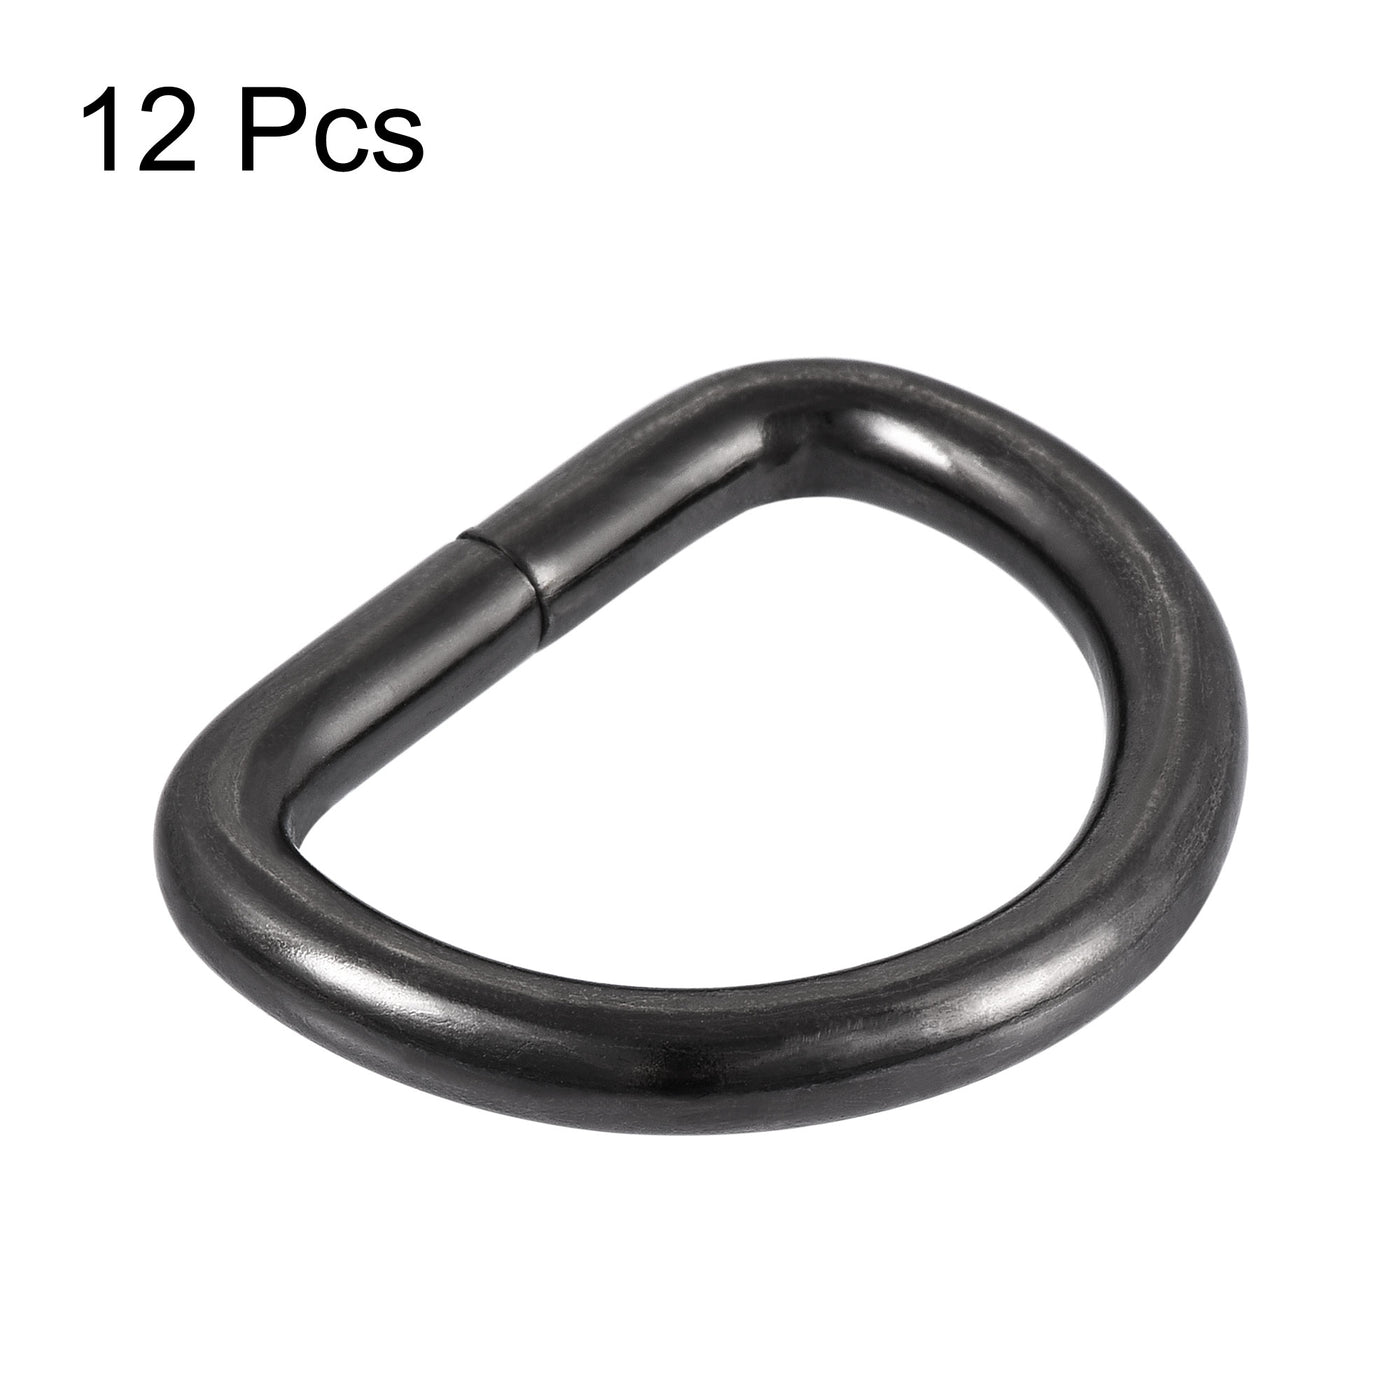 uxcell Uxcell Metal D Ring 0.98"(25mm) D-Rings Buckle for Hardware Bags Belts Craft DIY Accessories Black 12pcs